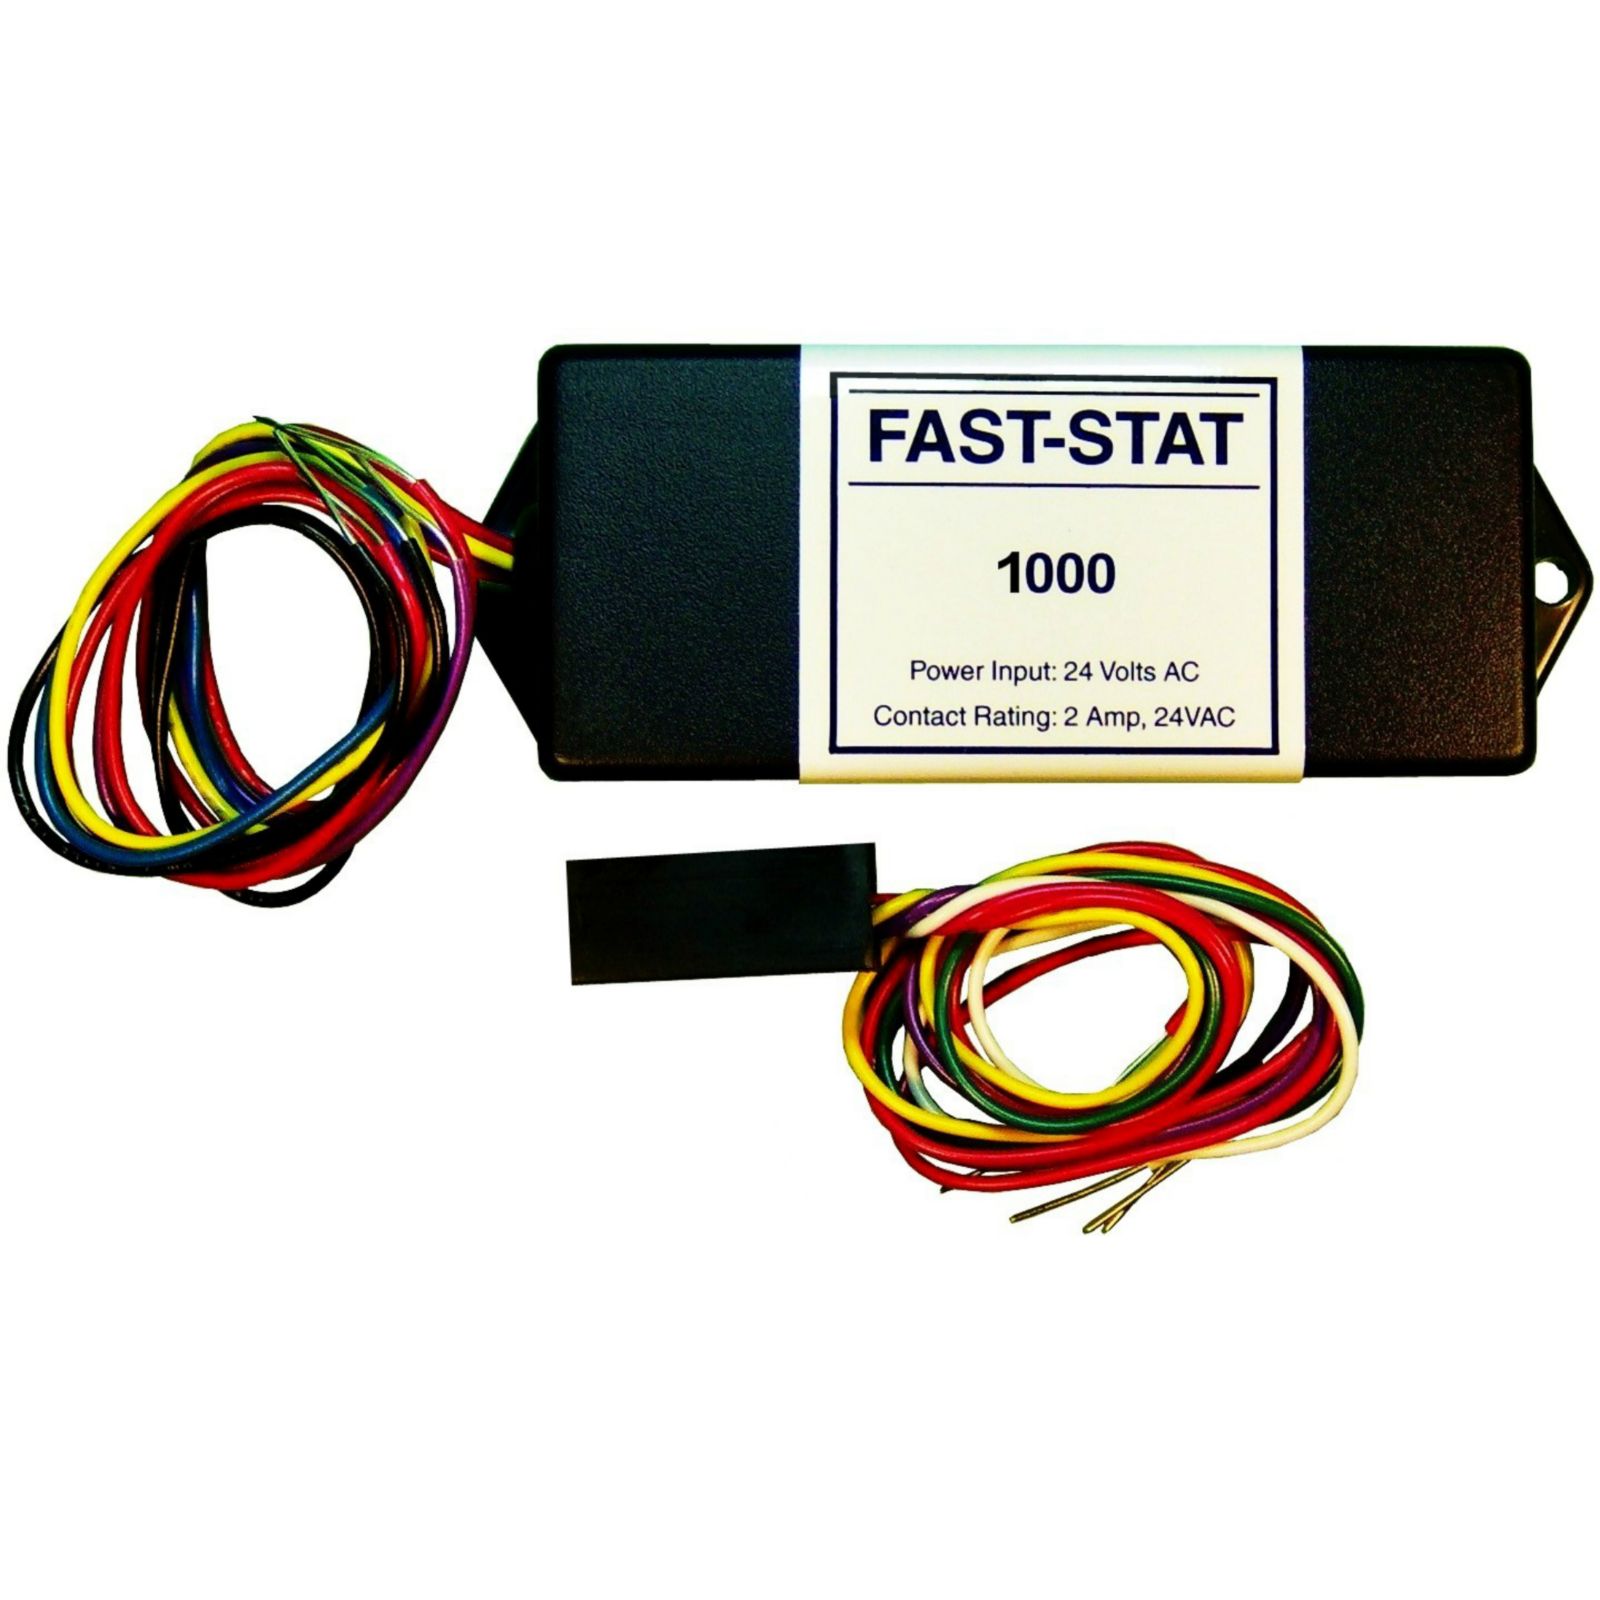 Nordic 1000 - Fast-Stat Wiring Extender